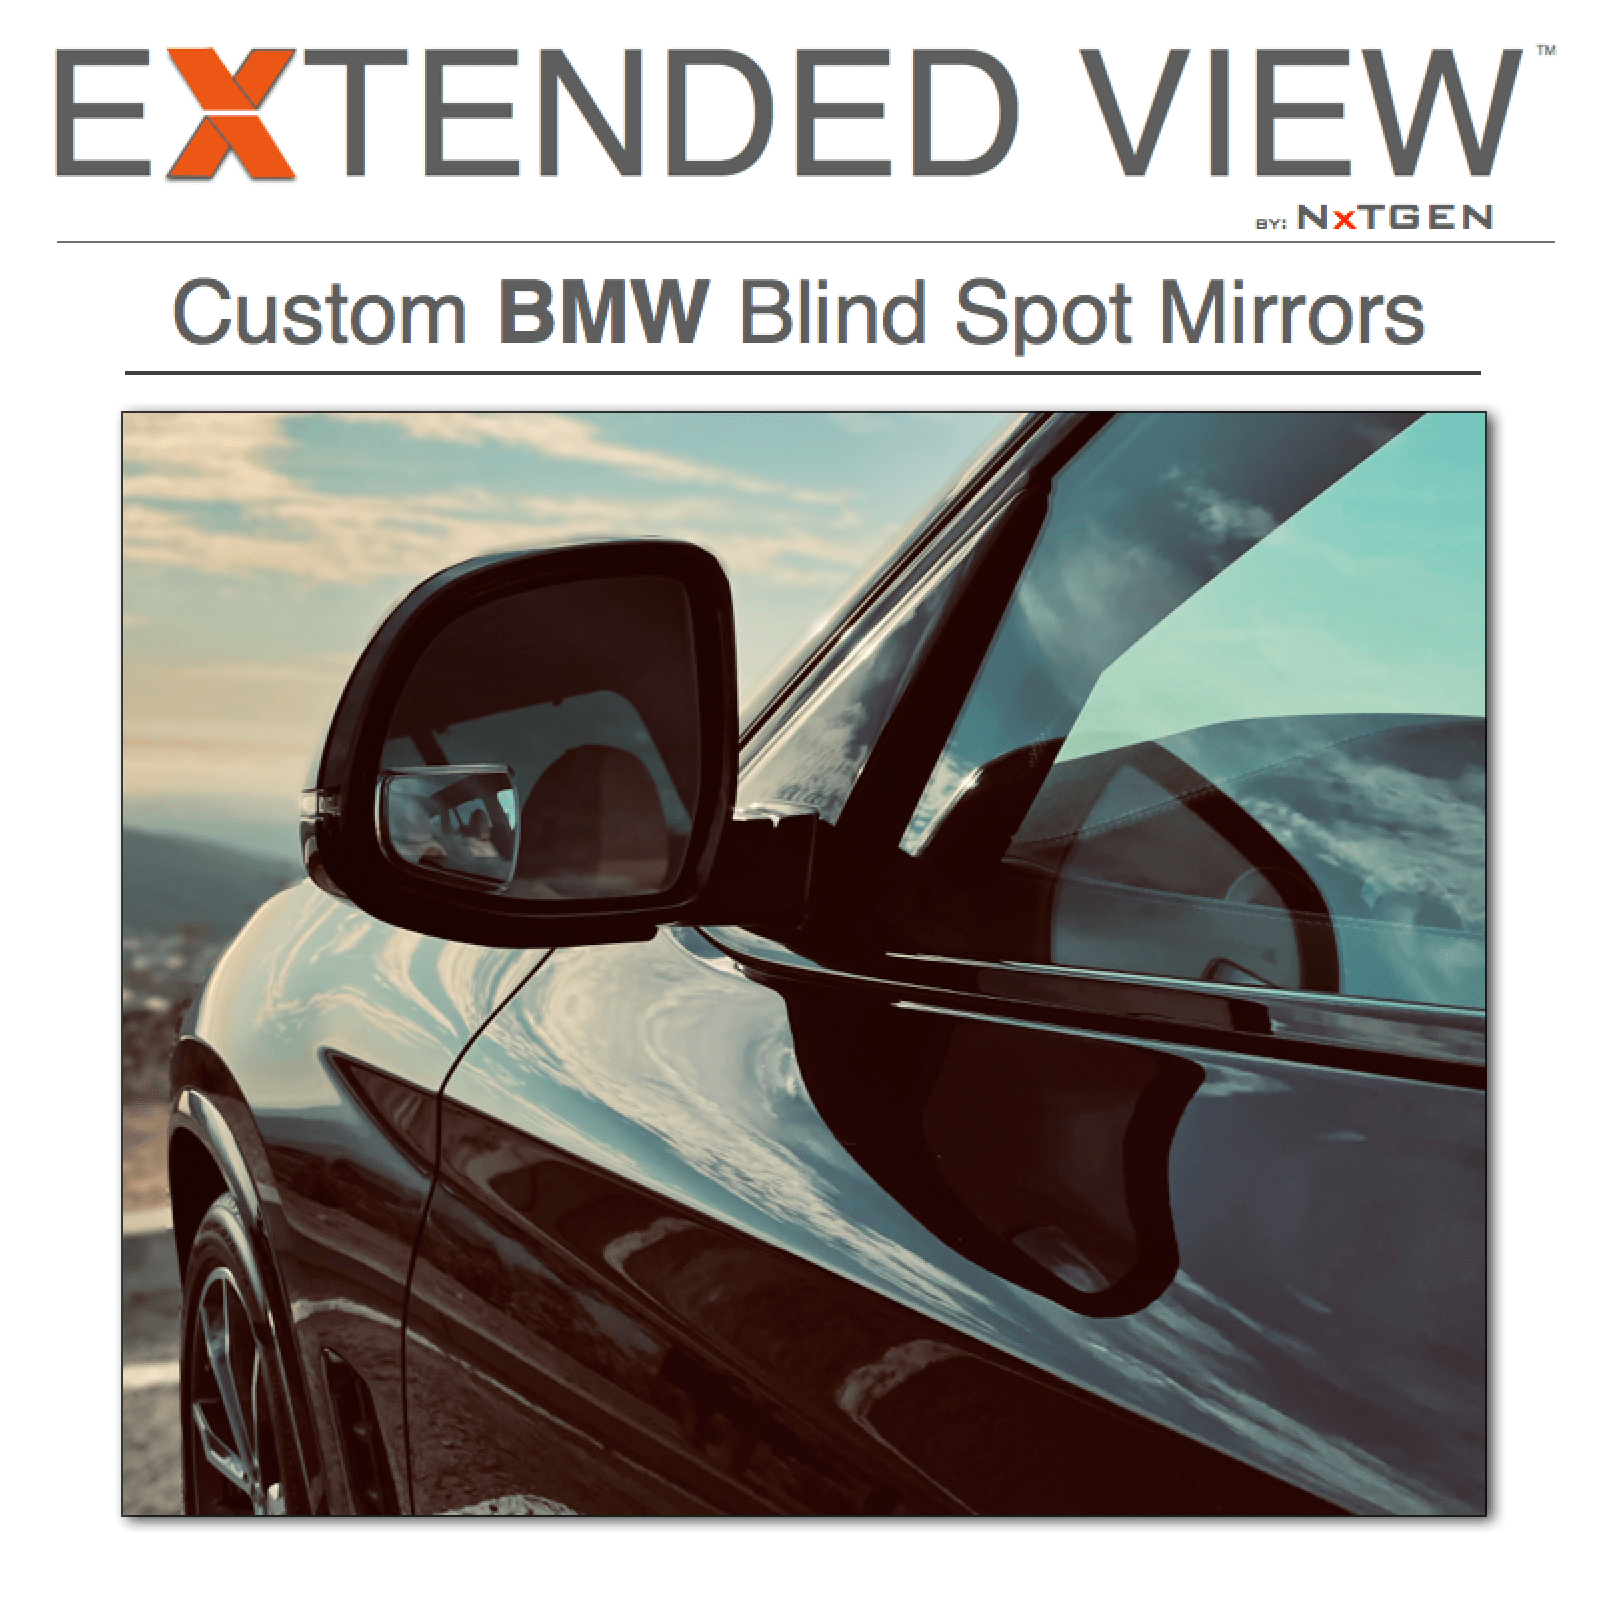 BMW X6 Extended View™